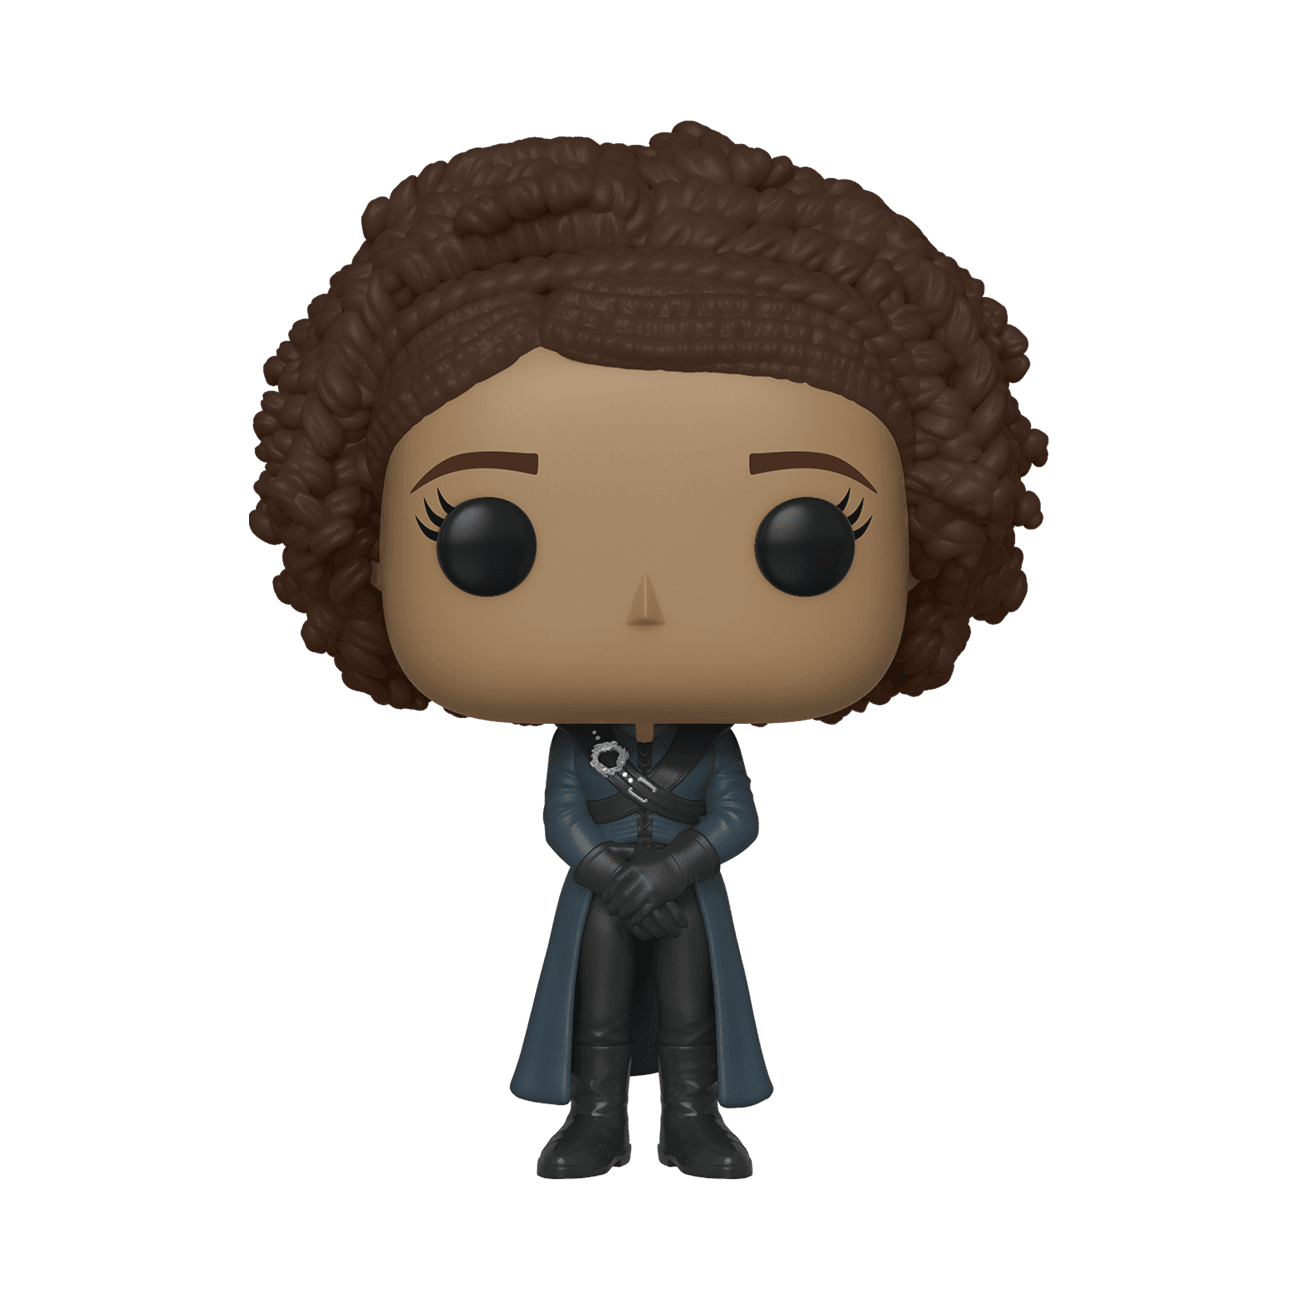 Funko Pop! Television - Game of Thrones #77 - Missandei (Fall Convention 2019 Exclusive) - Simply Toys